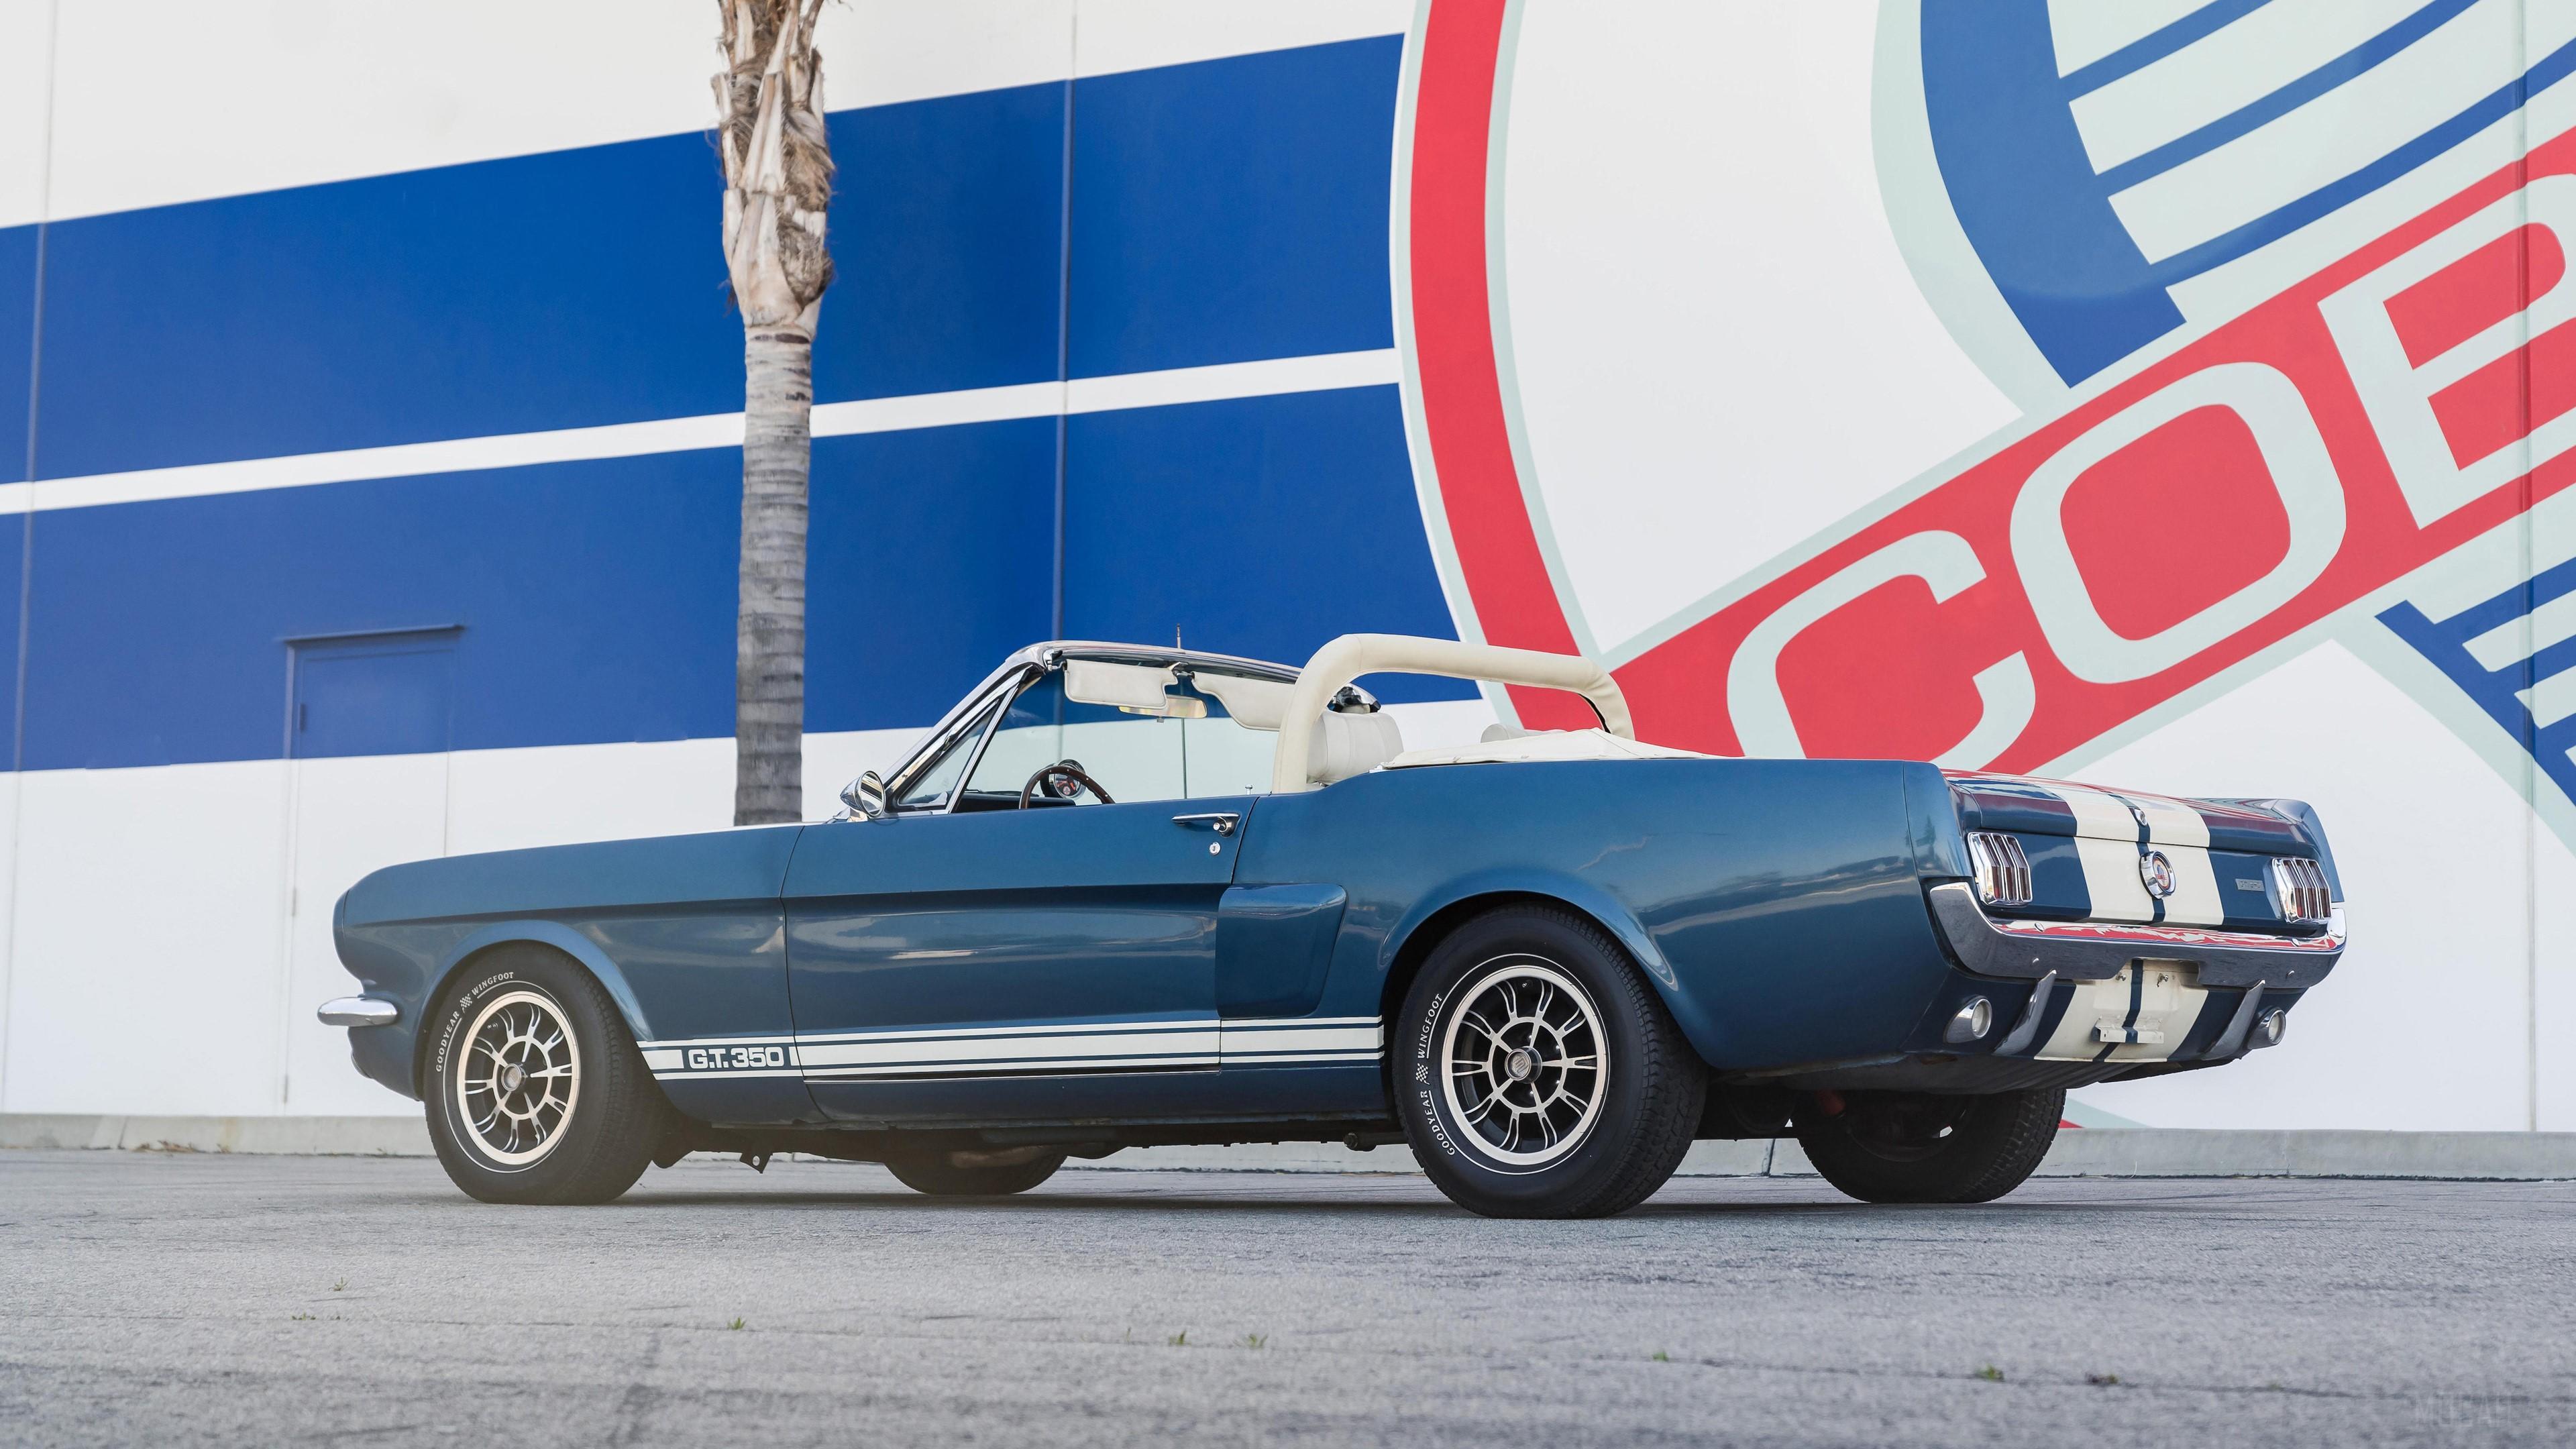 HD wallpaper, 1966 Shelby Gt350 Continuation Series Convertible Car 4K